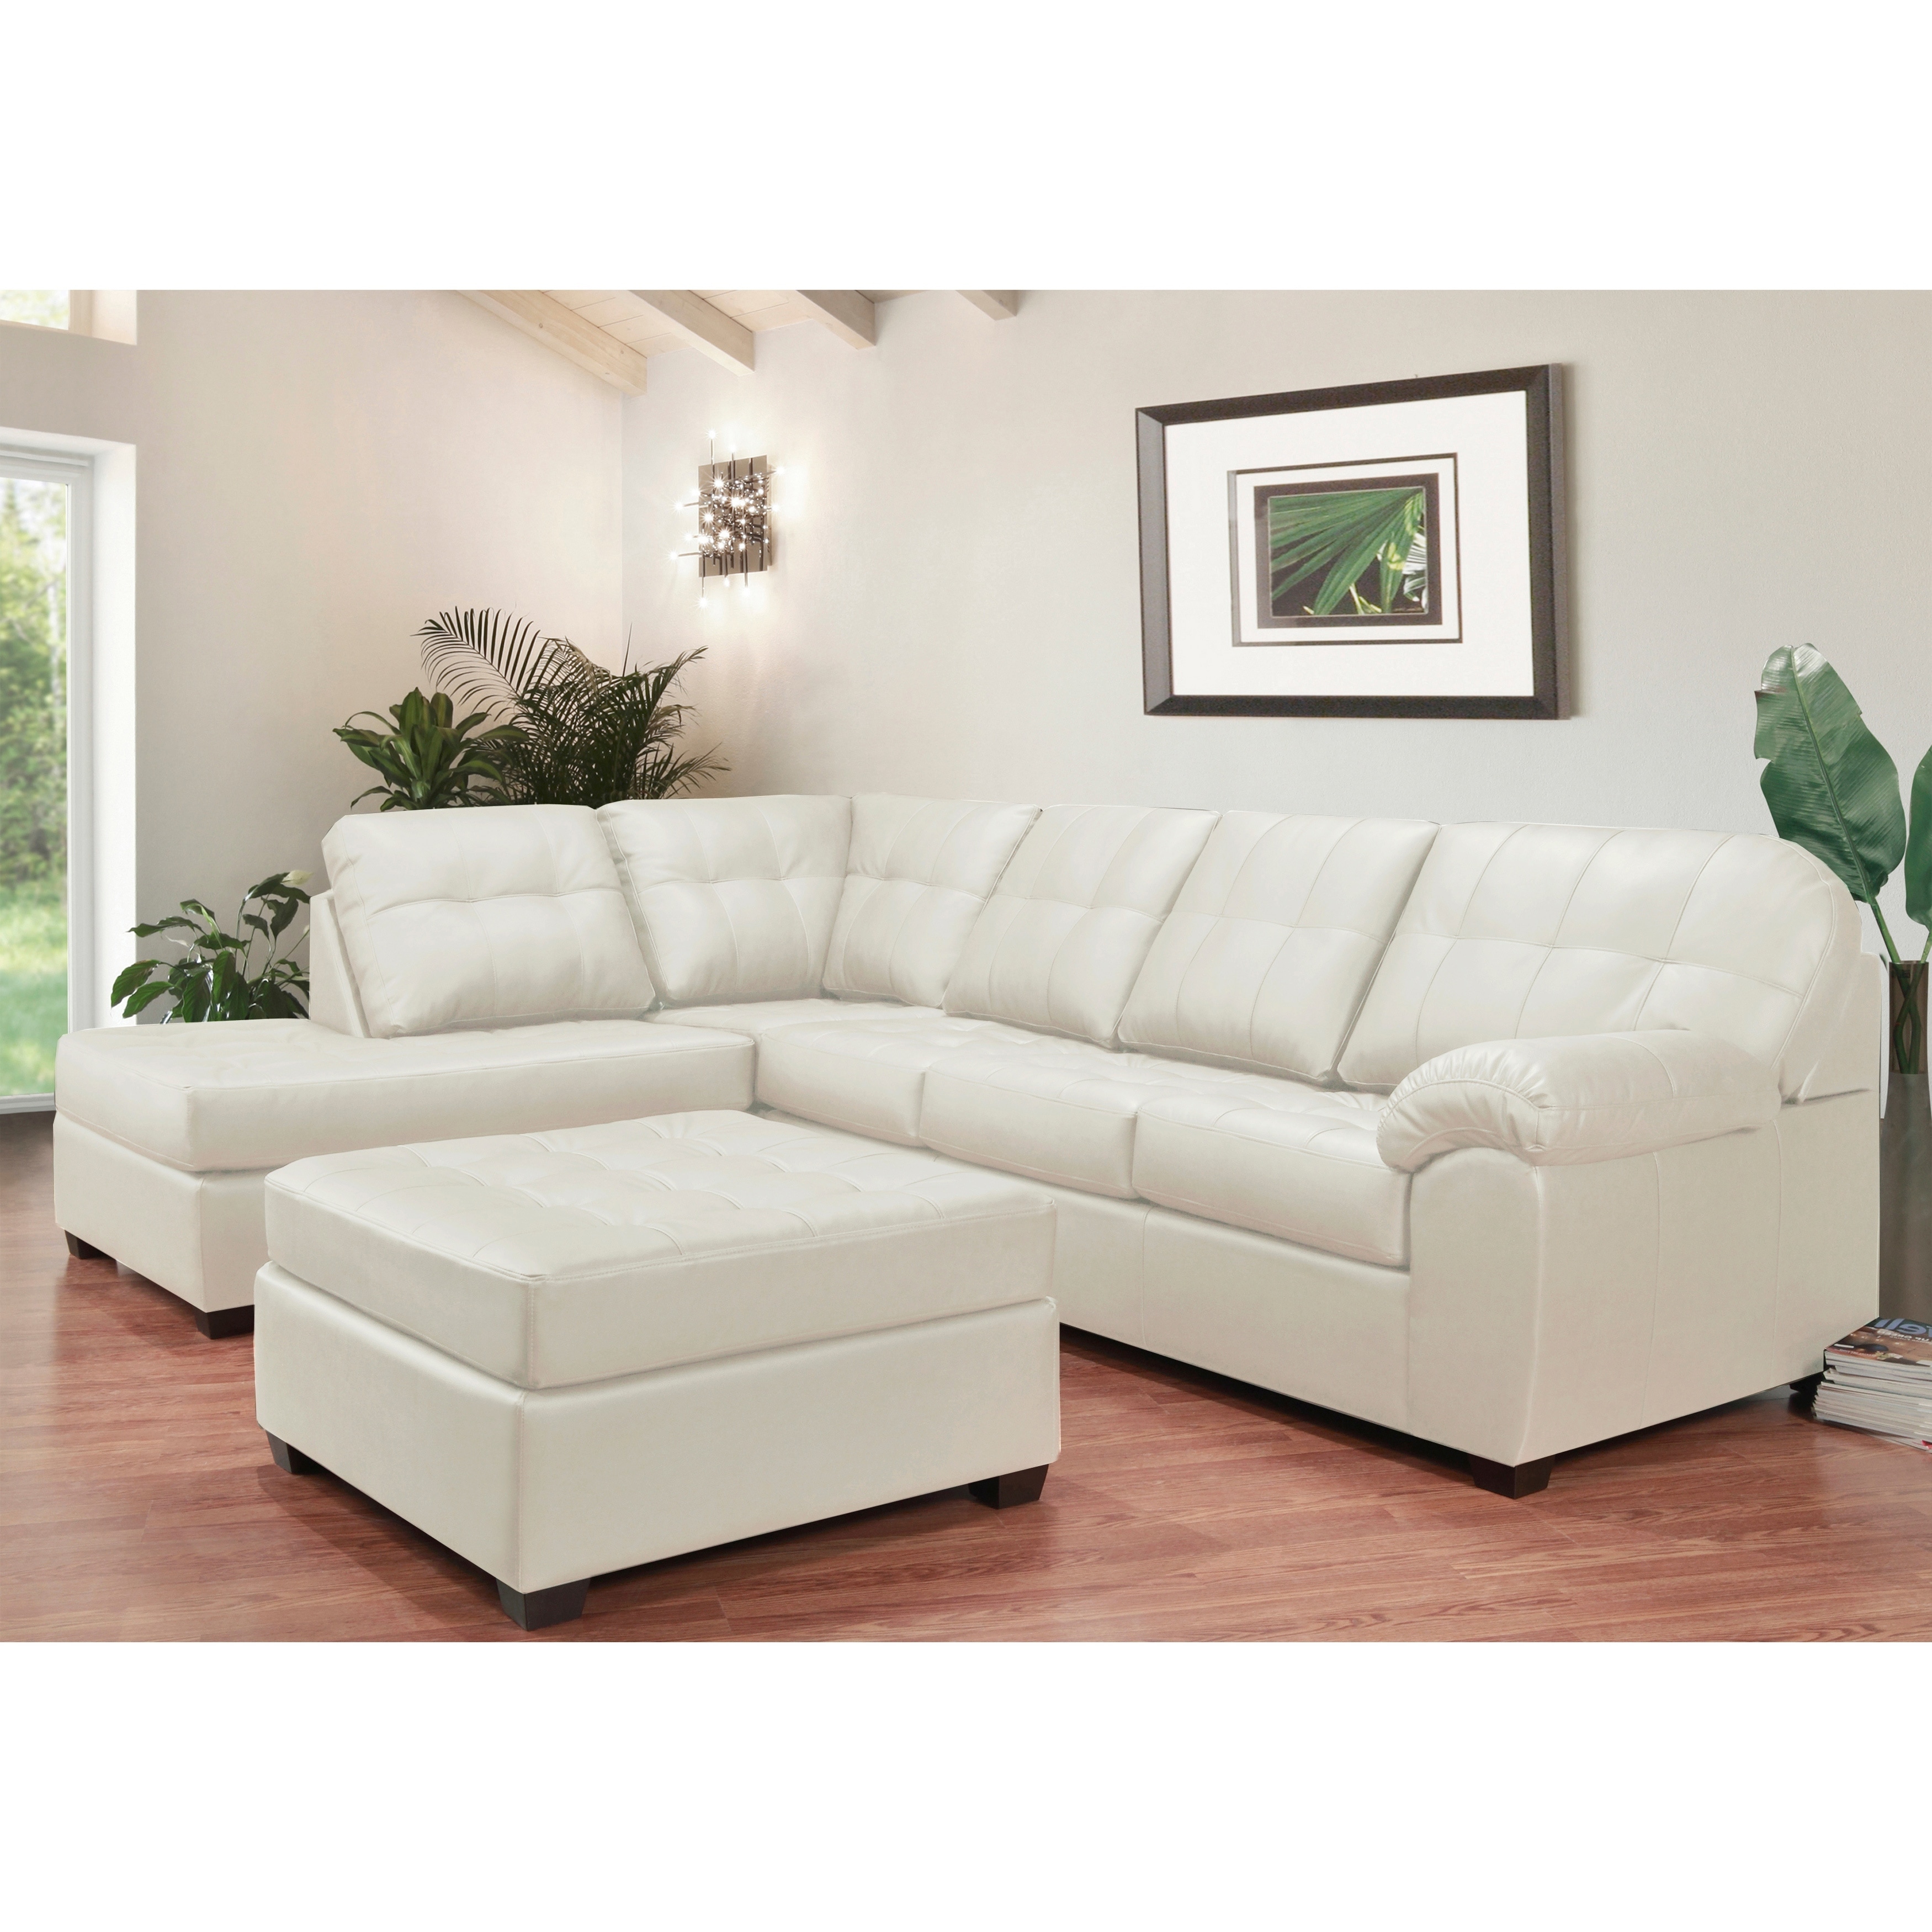 Emerson Top Grain Leather Tufted Sectional Sofa And Ottoman On Sale Overstock 23572830